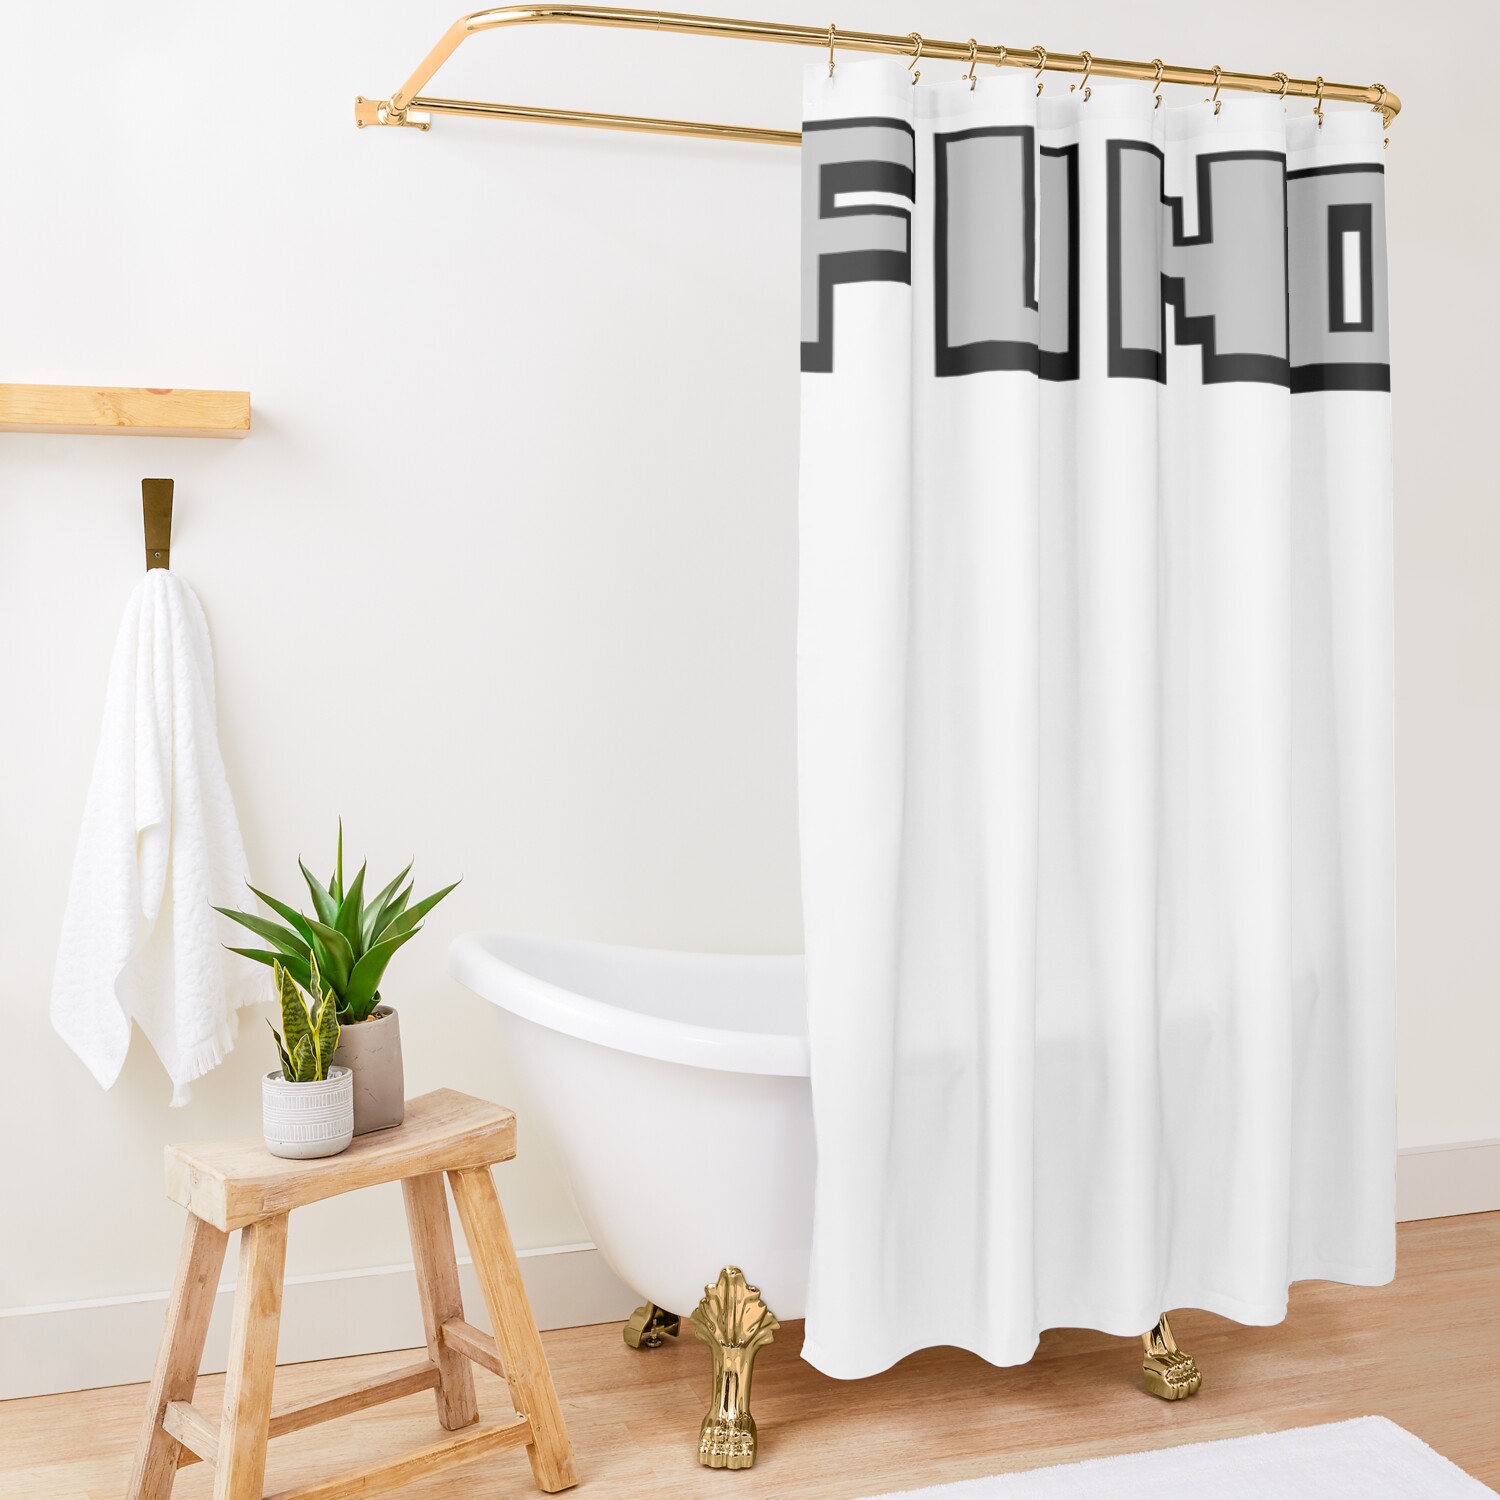 urshower curtain opensquare1500x1500 8 - Fundy Shop